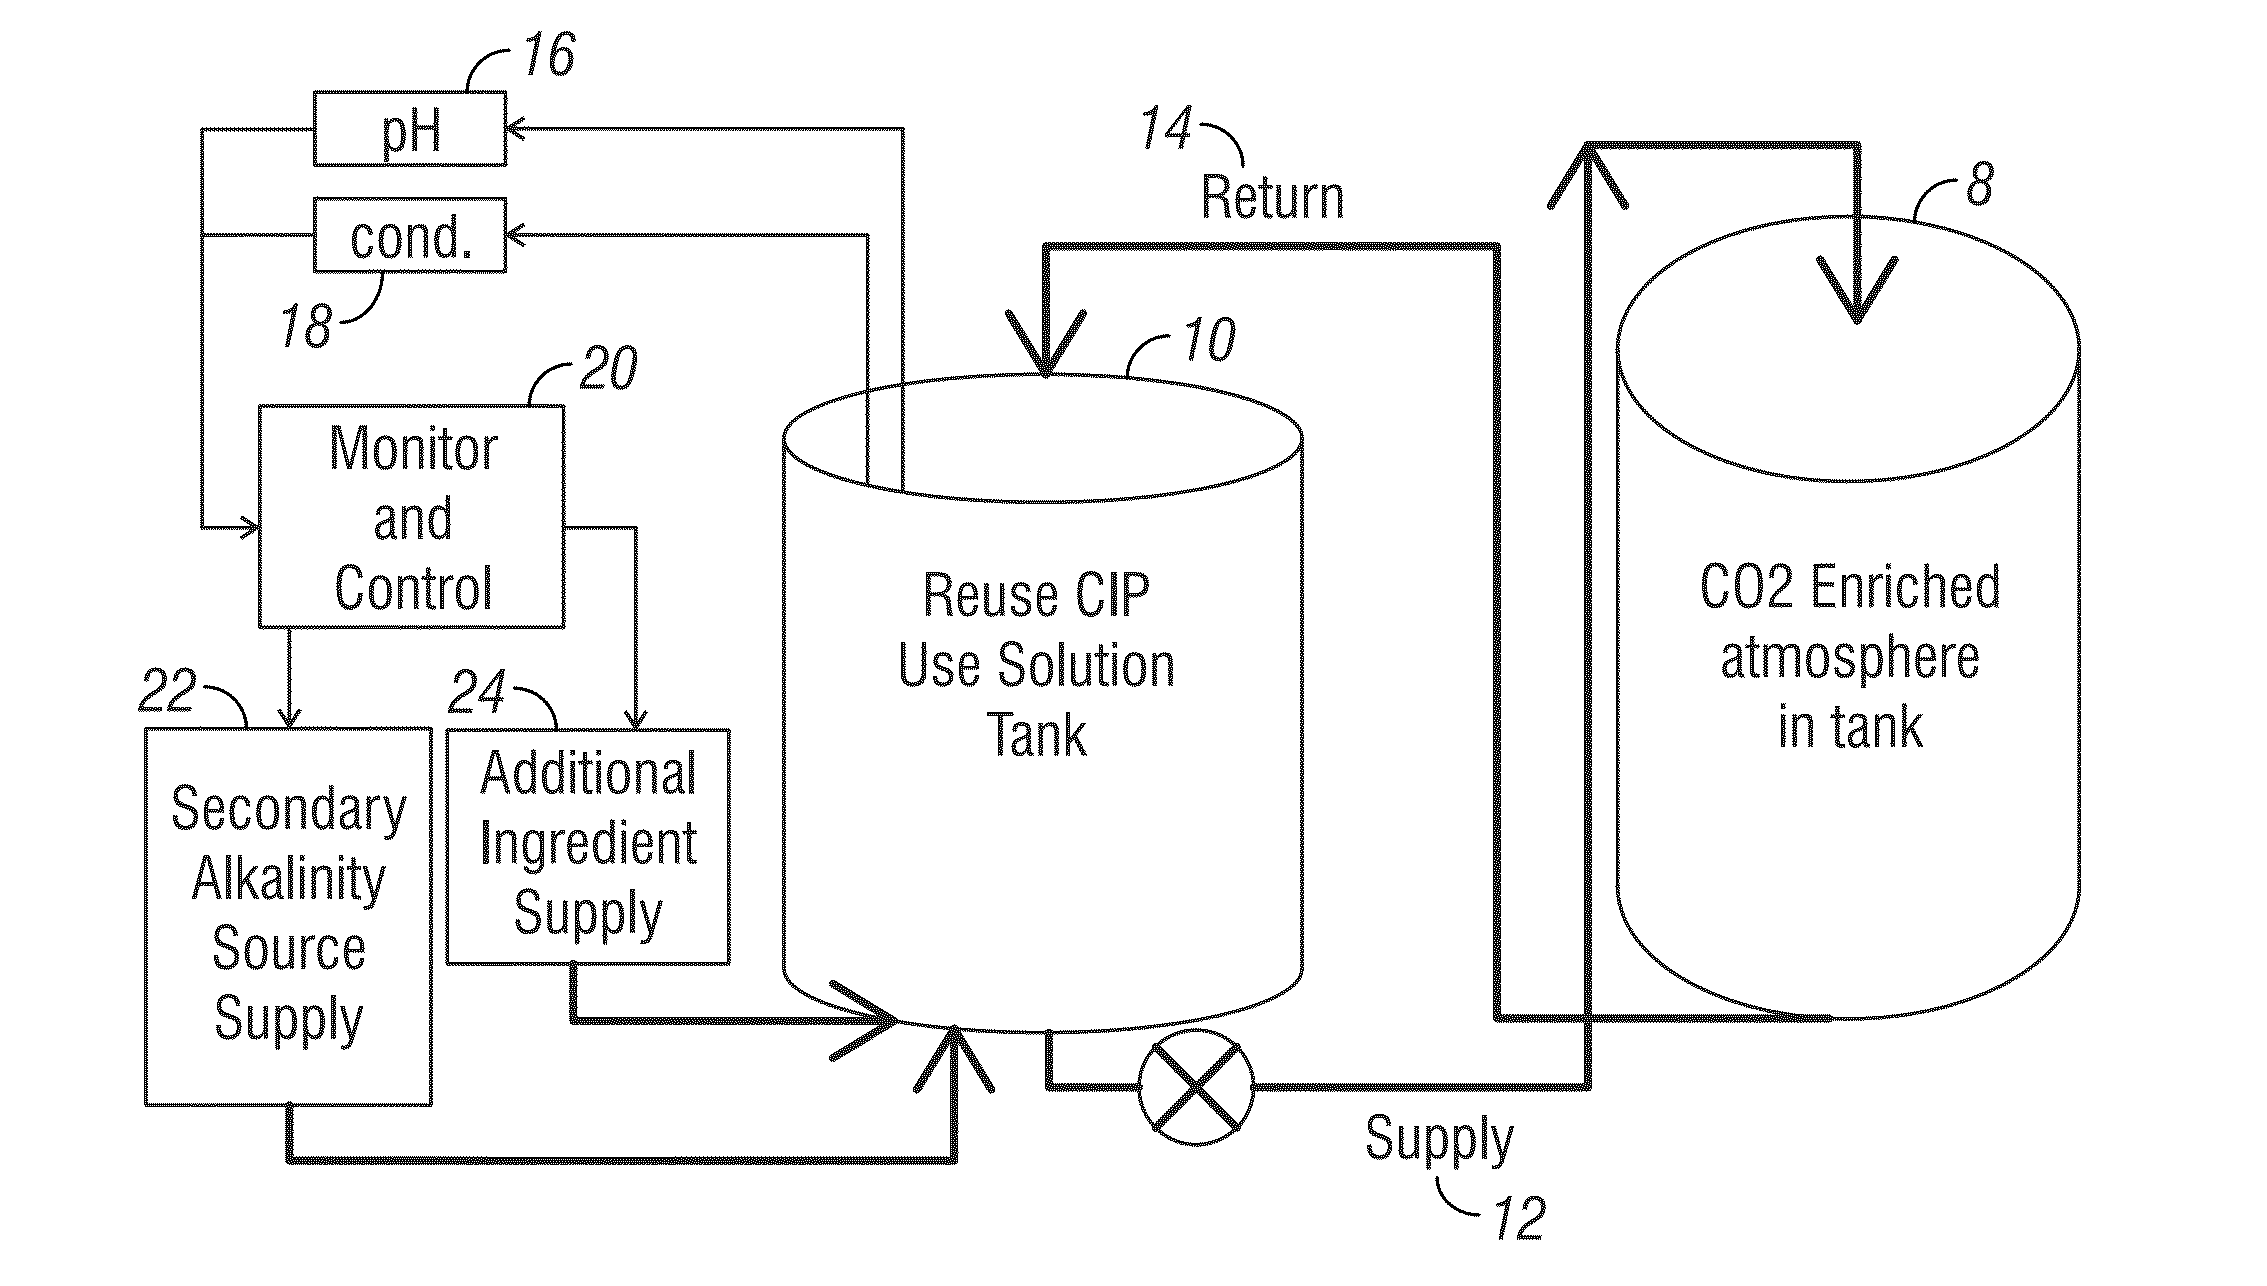 Method of generating carbonate in situ in a use solution and of buffered alkaline cleaning under an enriched co2 atmosphere